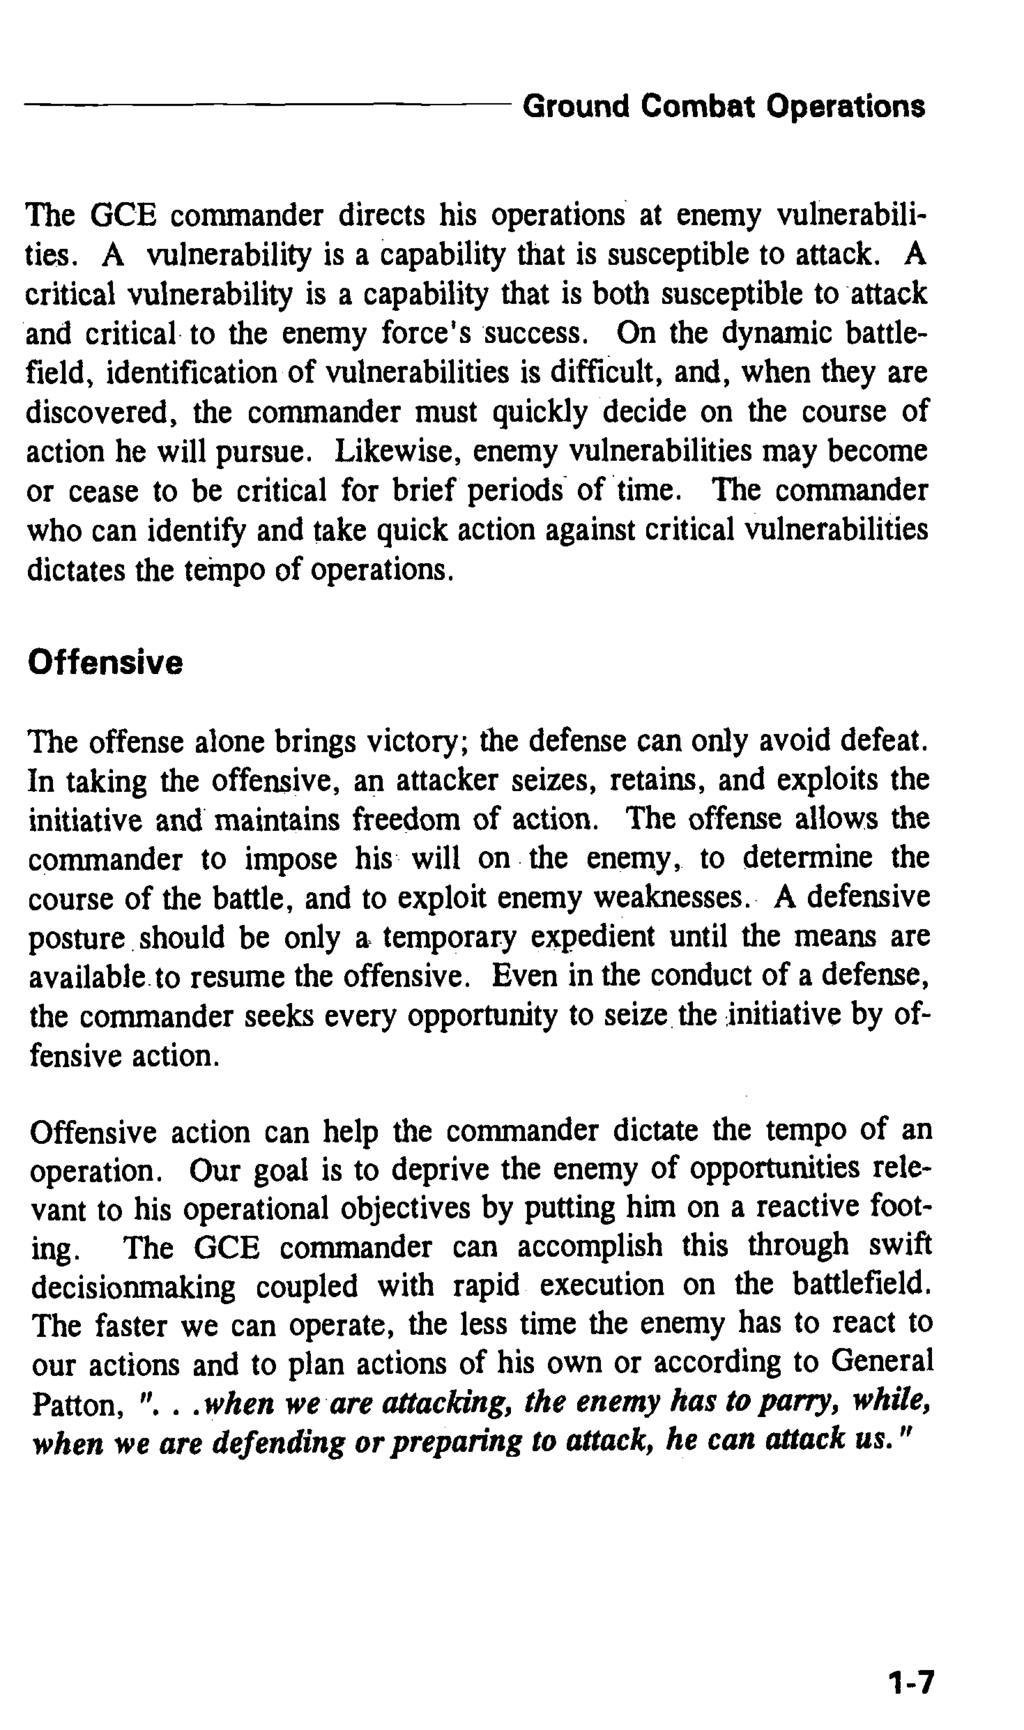 Ground Combat Operations The GCE commander directs his operations at enemy vulnerabilities. A vulnerability is a capability that is susceptible to attack.